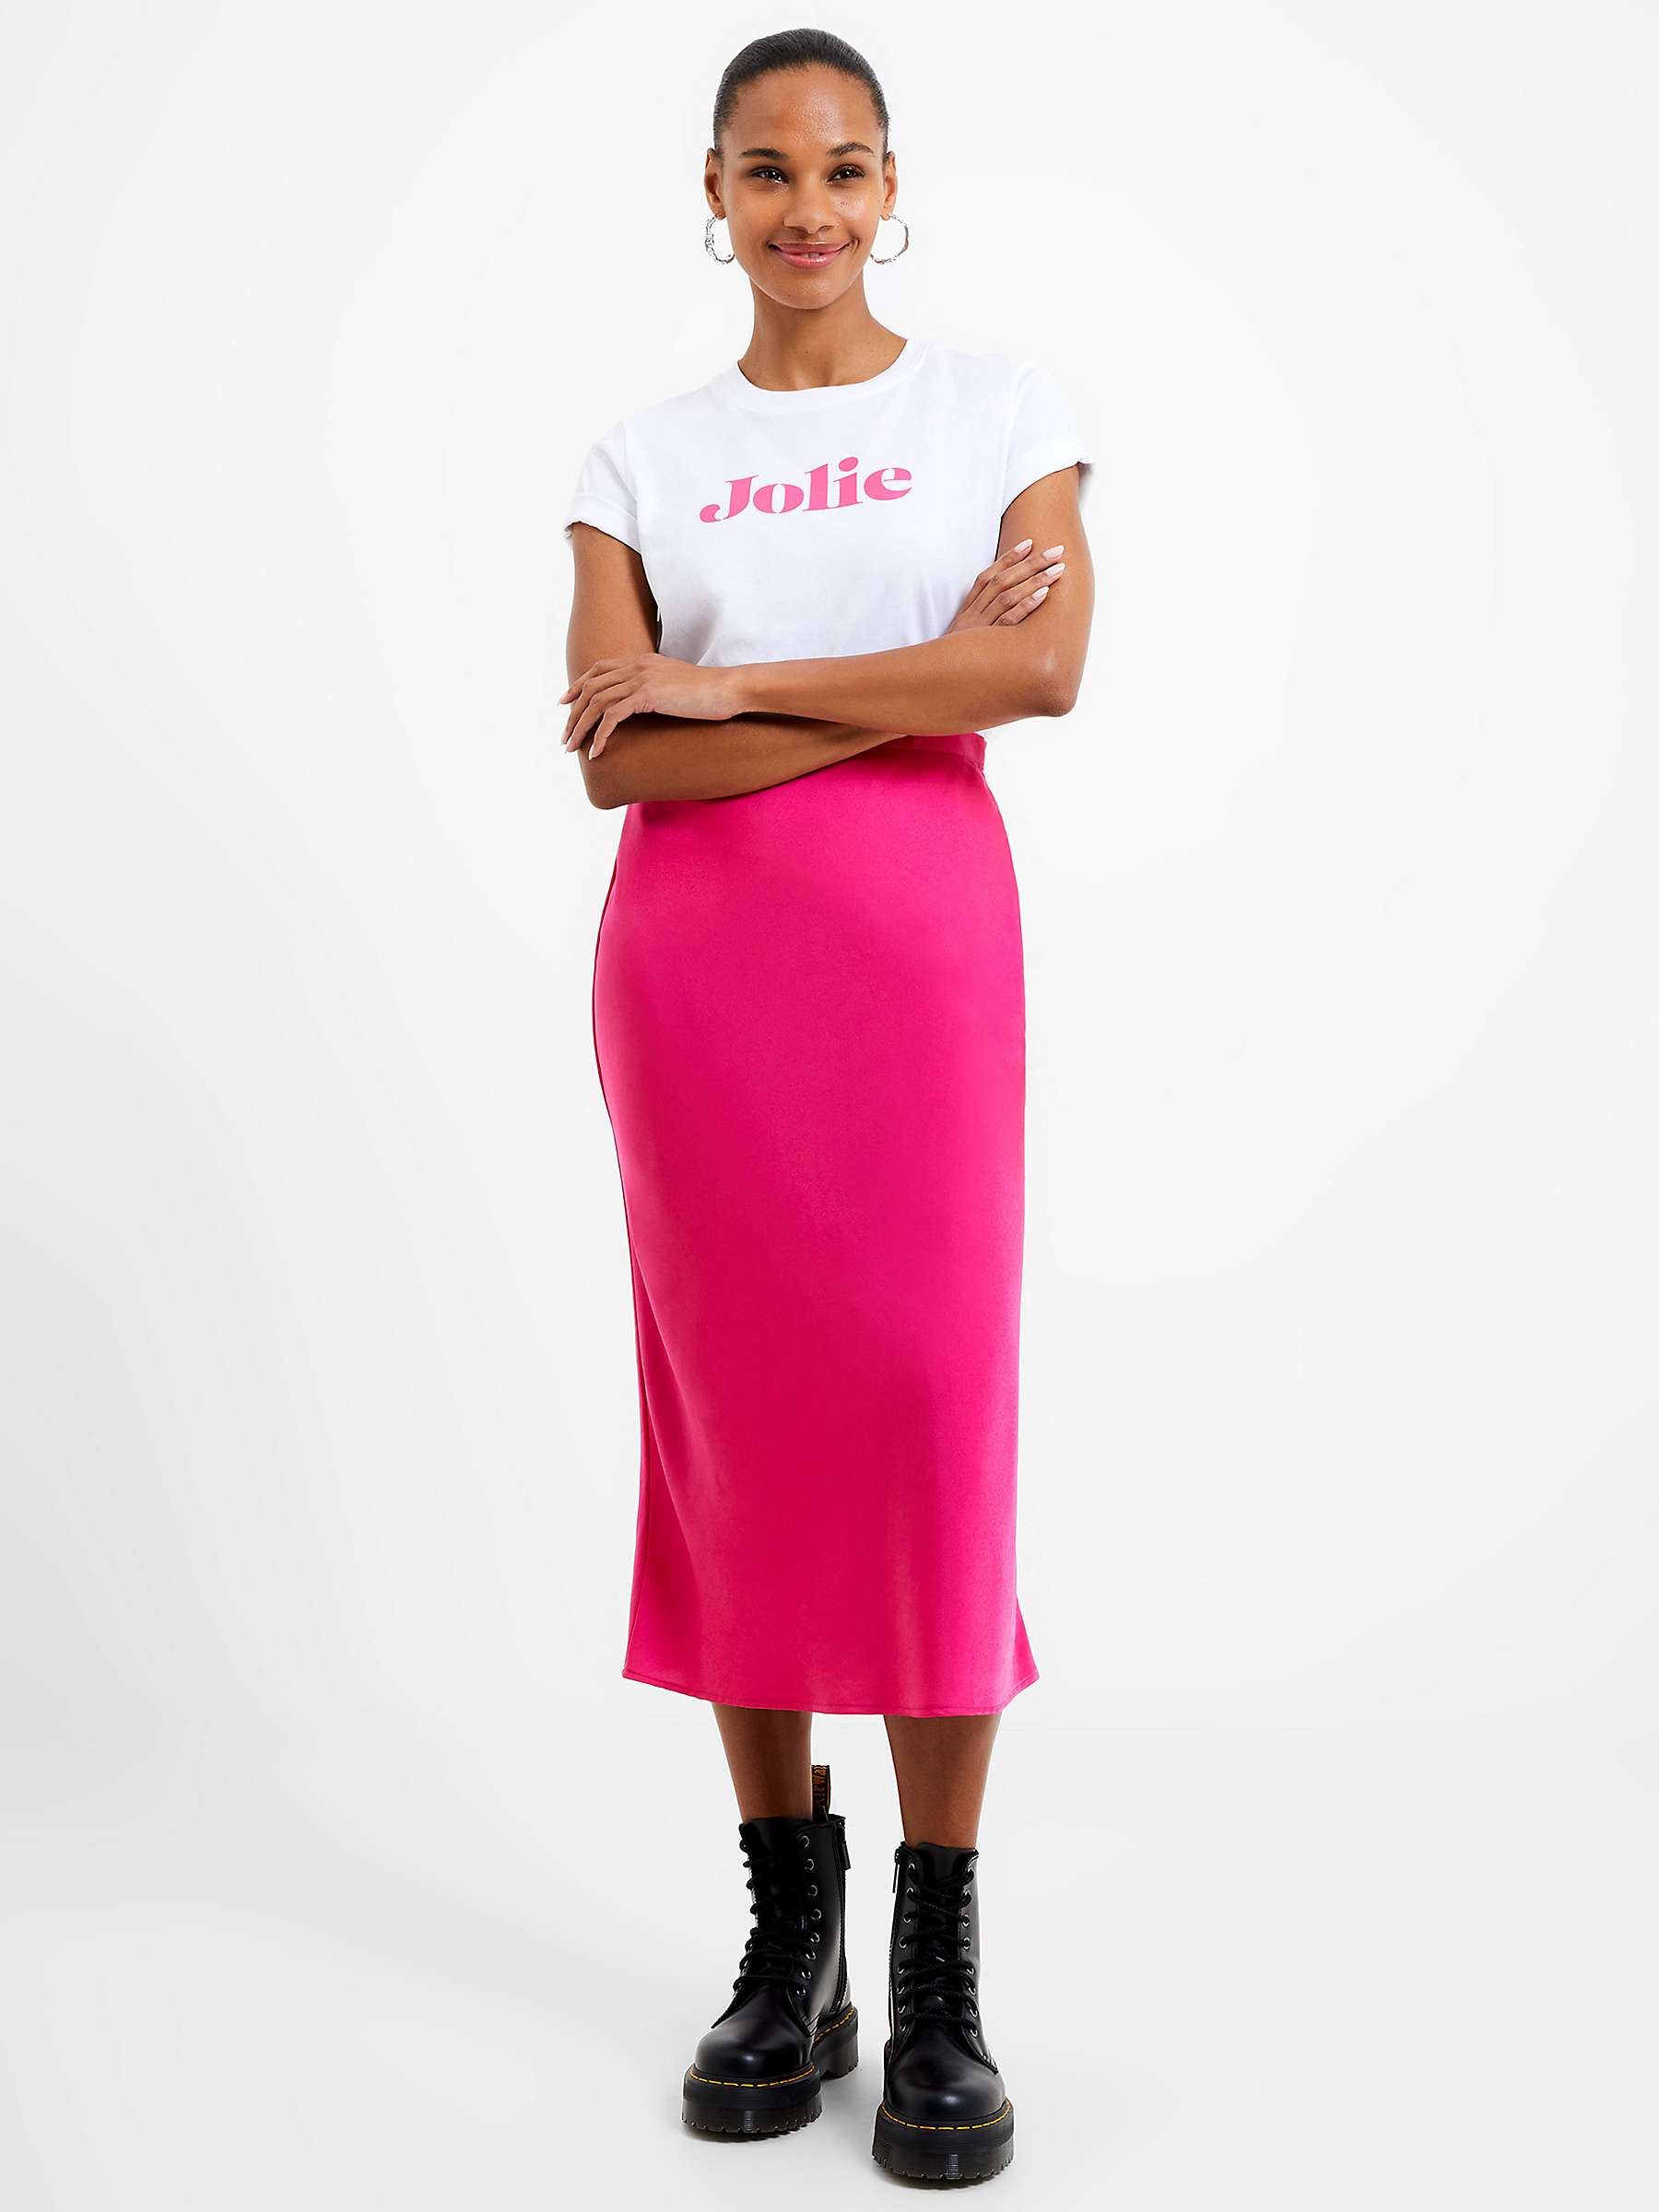 Buy French Connection Satin Slip Midi Skirt, Hot Pink Online at johnlewis.com